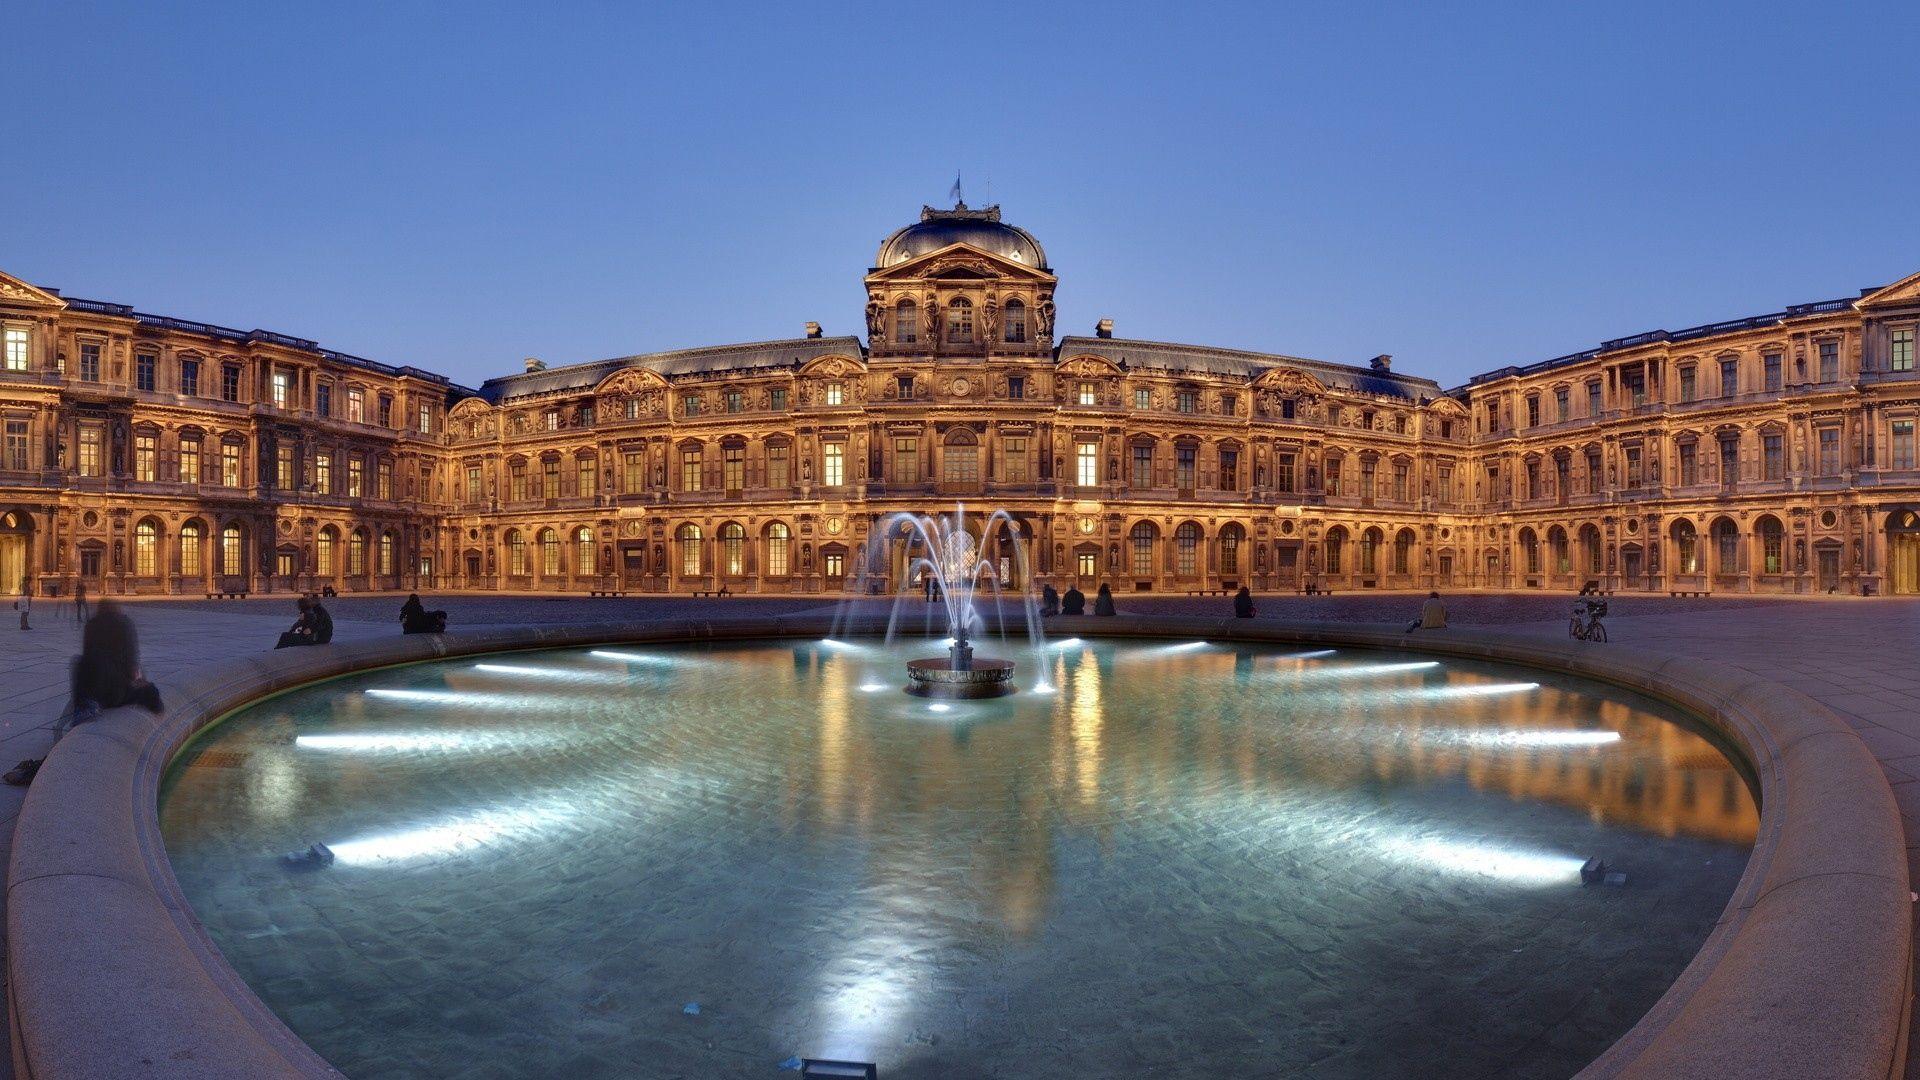 Louvre Wallpaper, HD Louvre Wallpaper and Photo. View Full